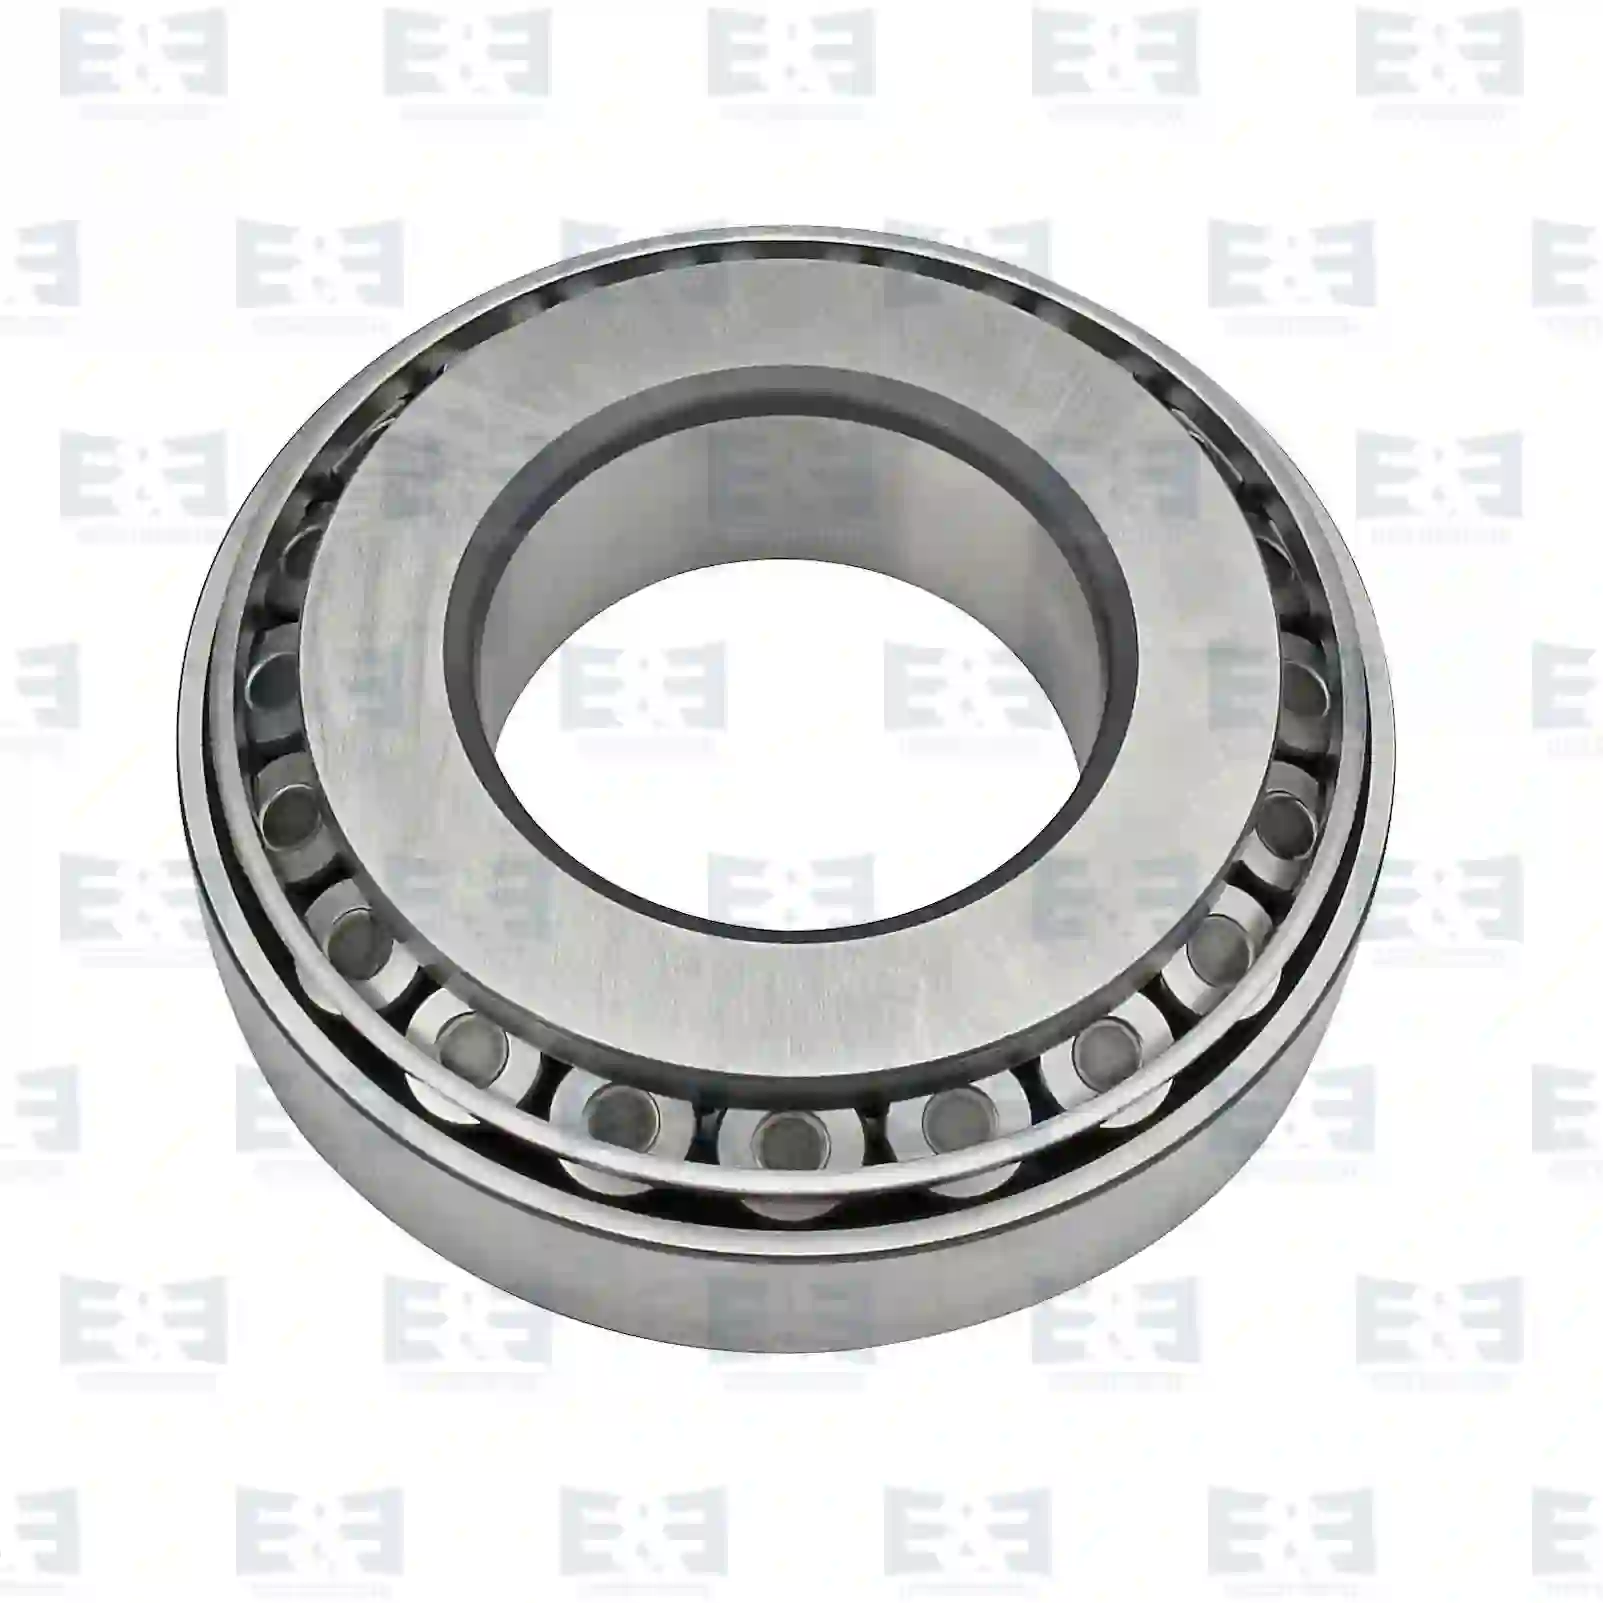  Tapered roller bearing || E&E Truck Spare Parts | Truck Spare Parts, Auotomotive Spare Parts